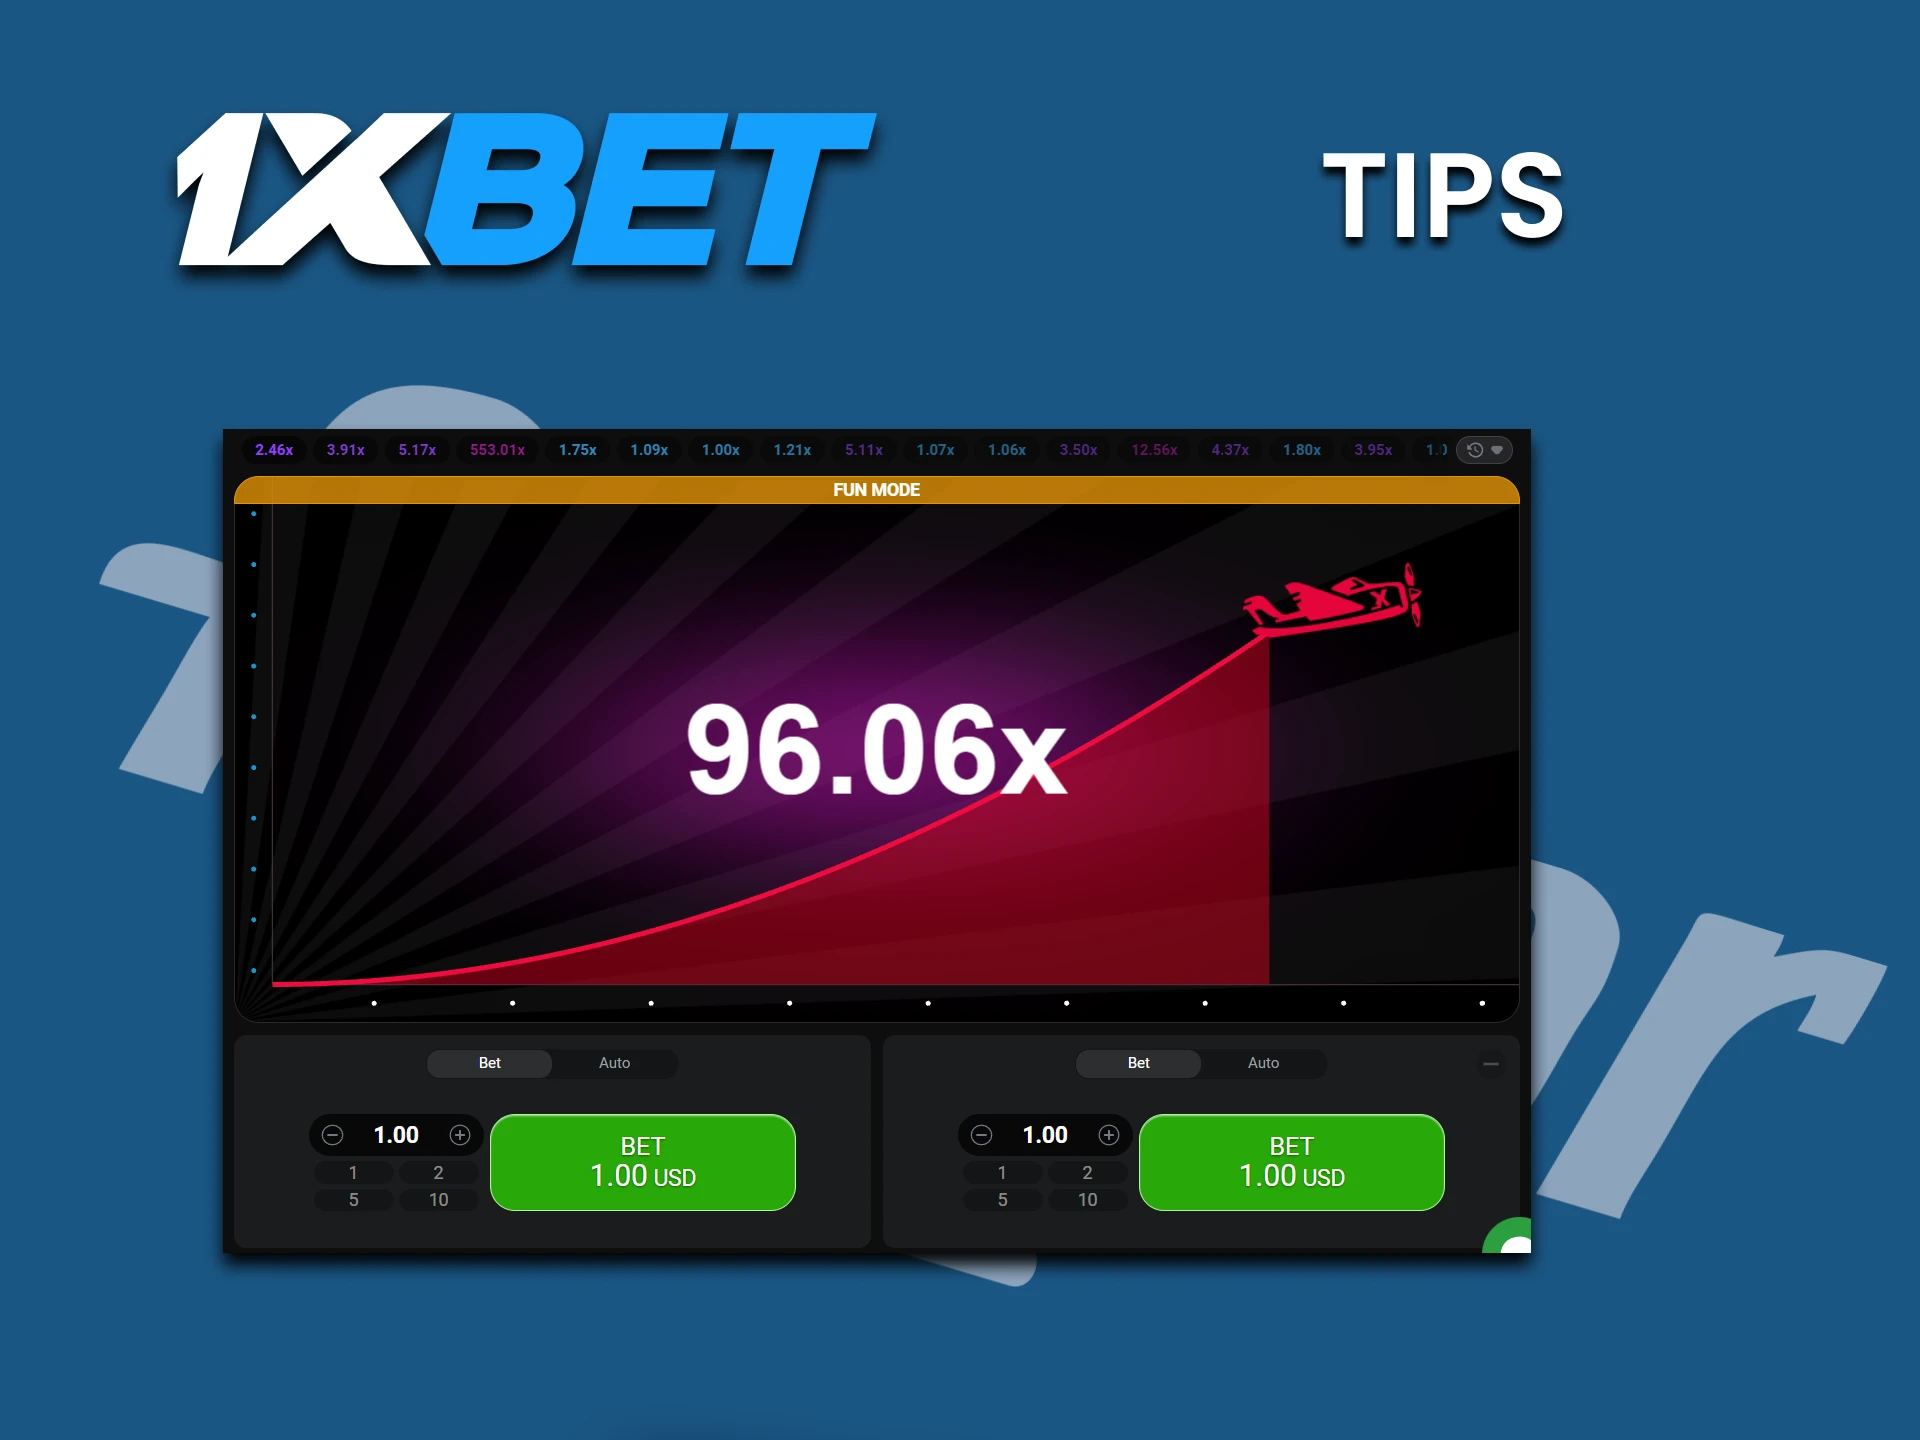 Carefully study the advice of other Aviator players on 1xbet.